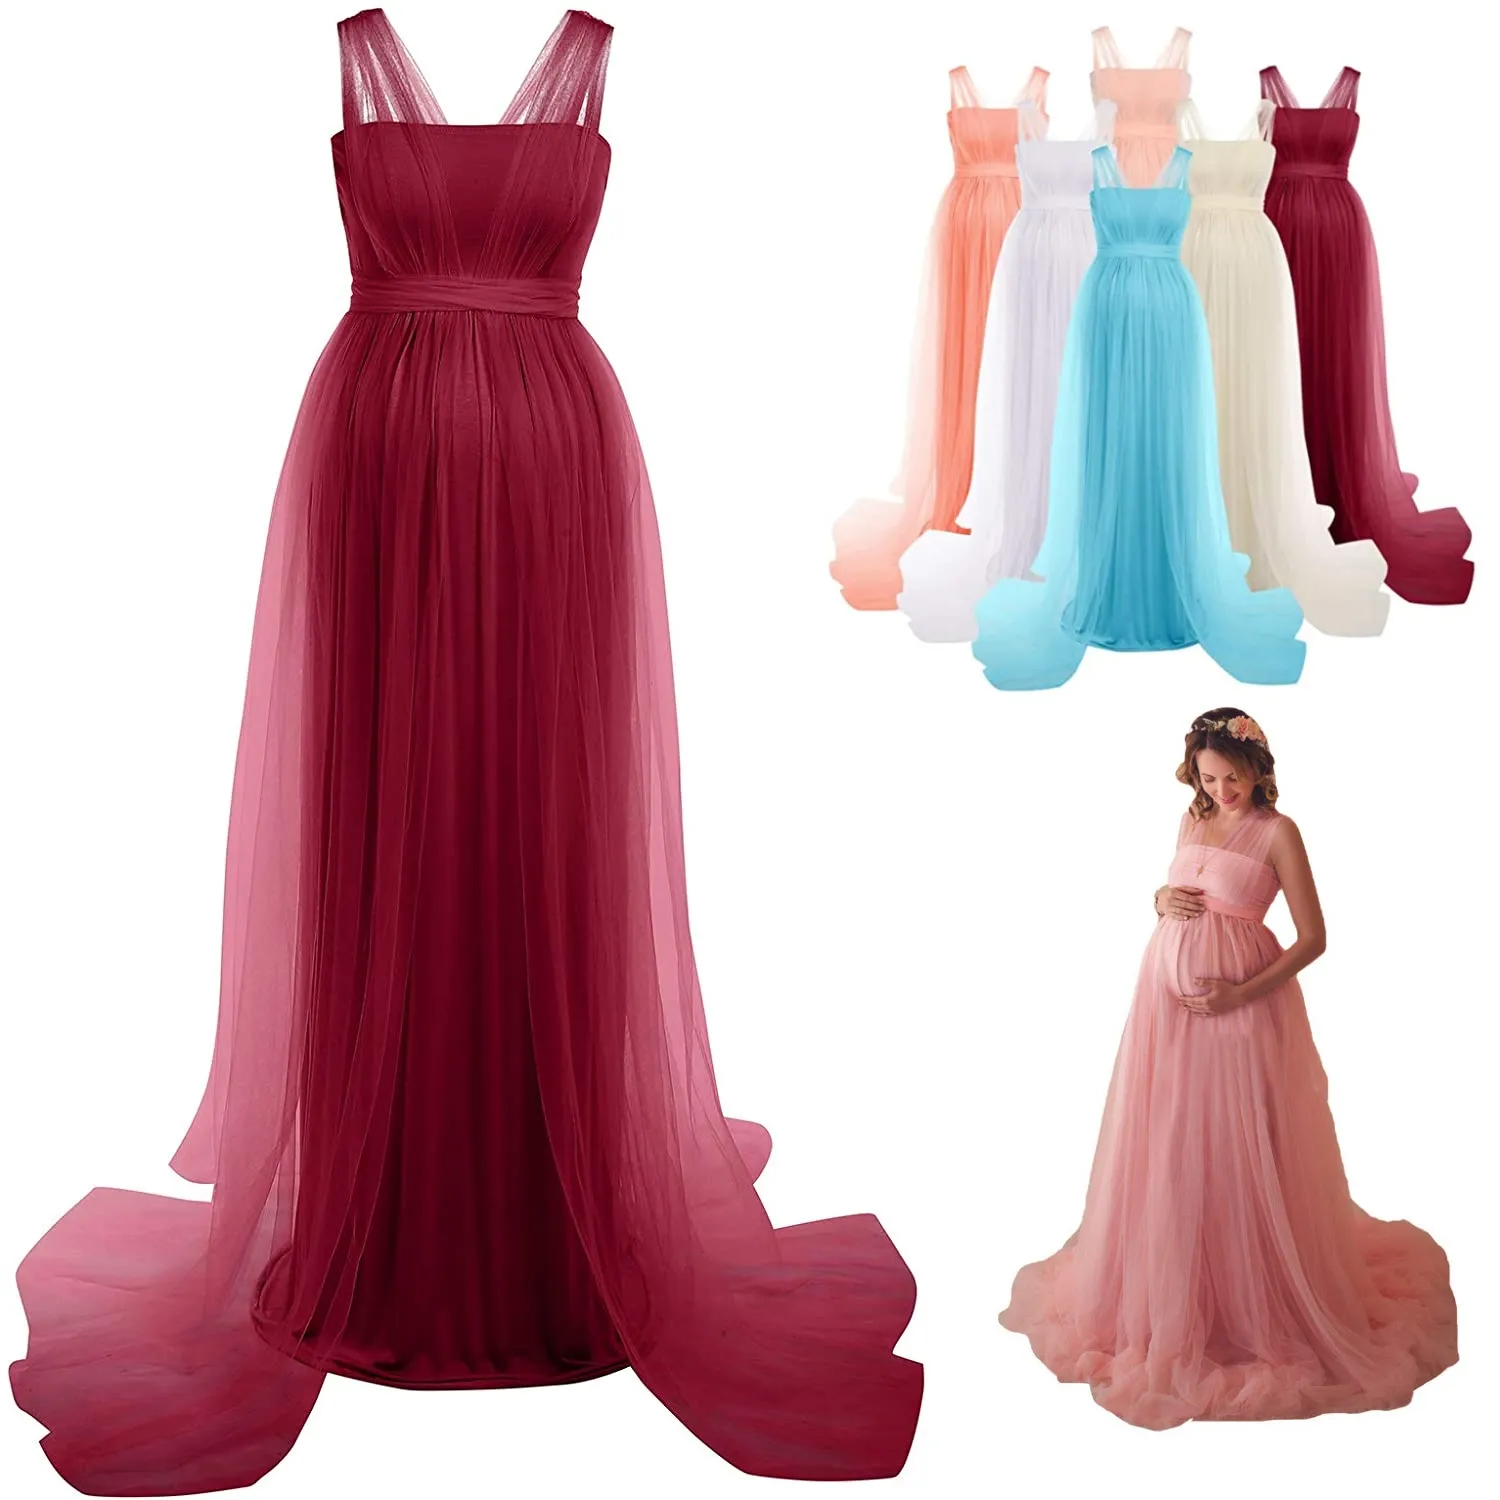 Enlarge Maternity Photo Shoot Dress Multiway Wrap Tulle Long Maxi Gown Pregnant Women Party Baby Shower Dress Photography Props Costume